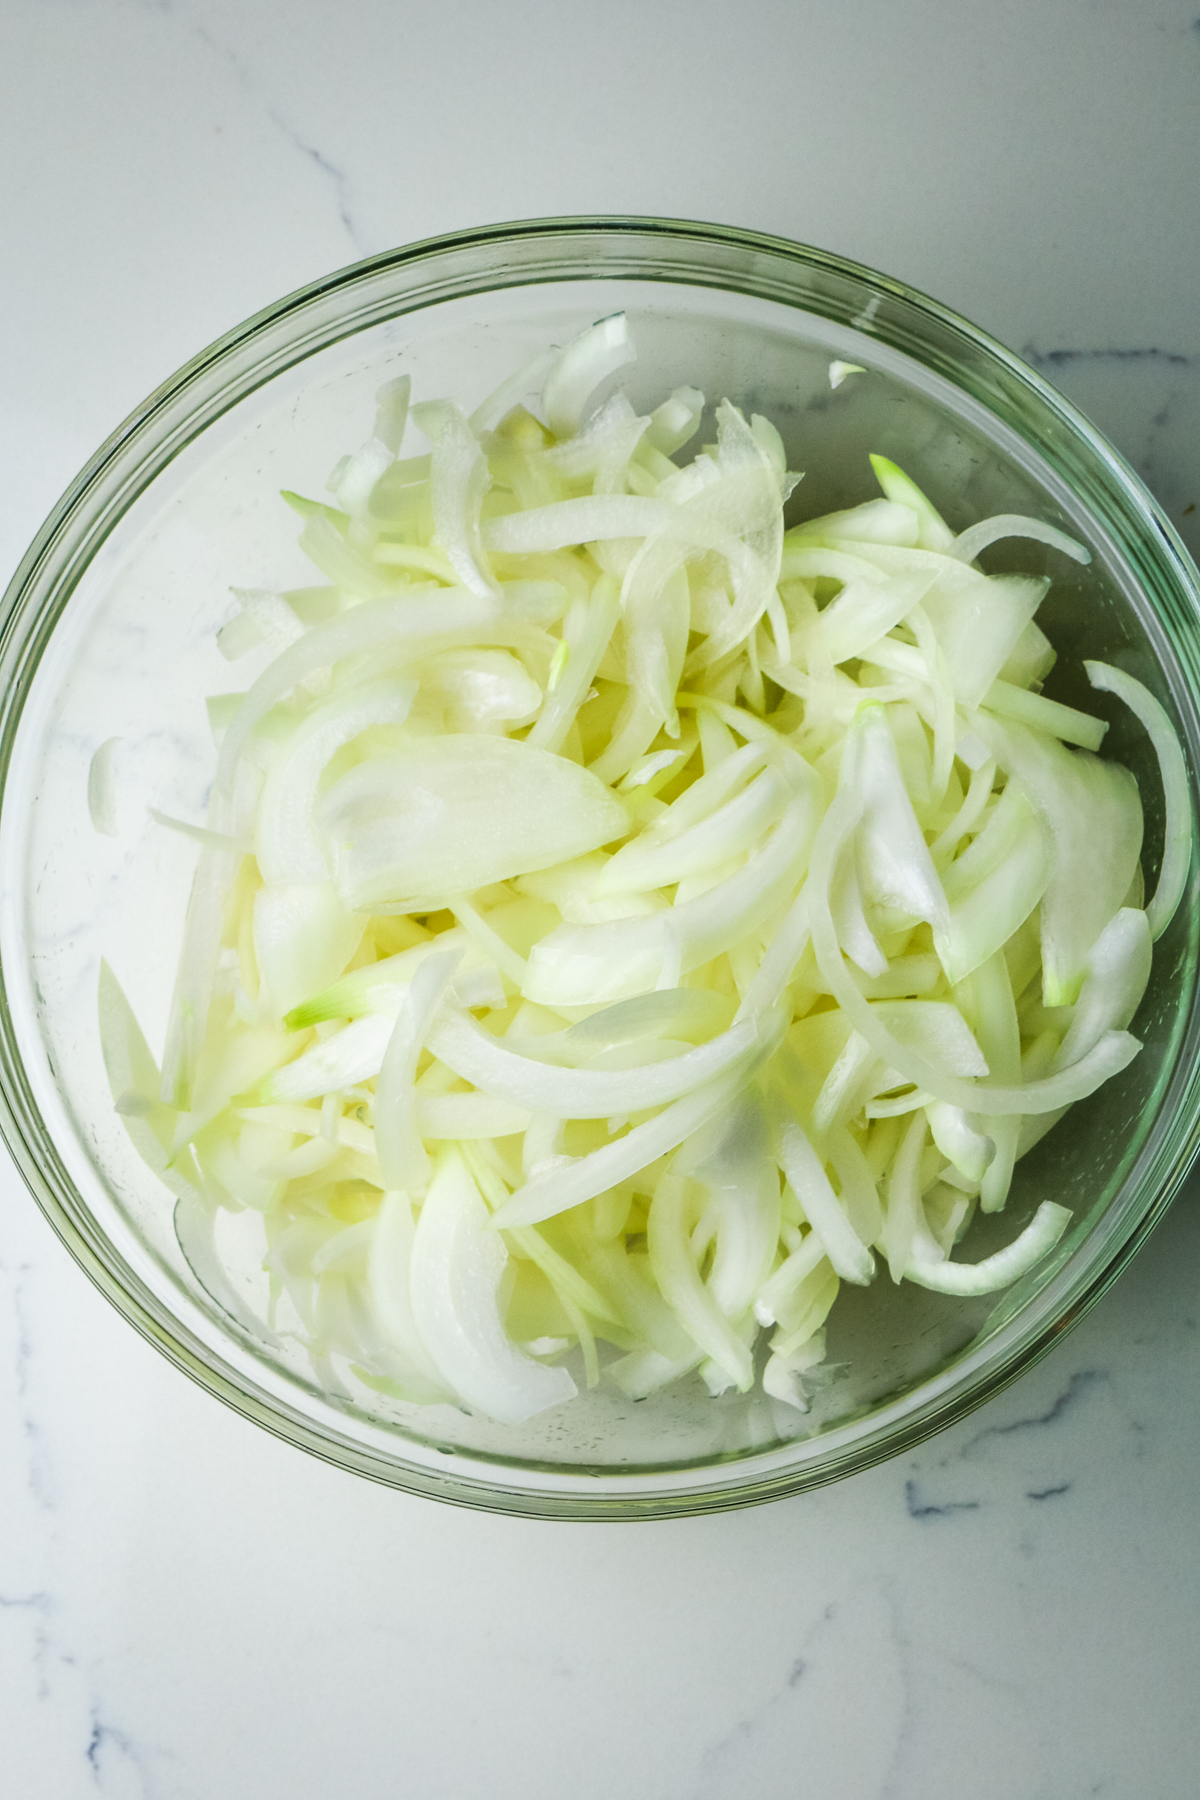 thinly sliced yellow onion in a glass bowl.